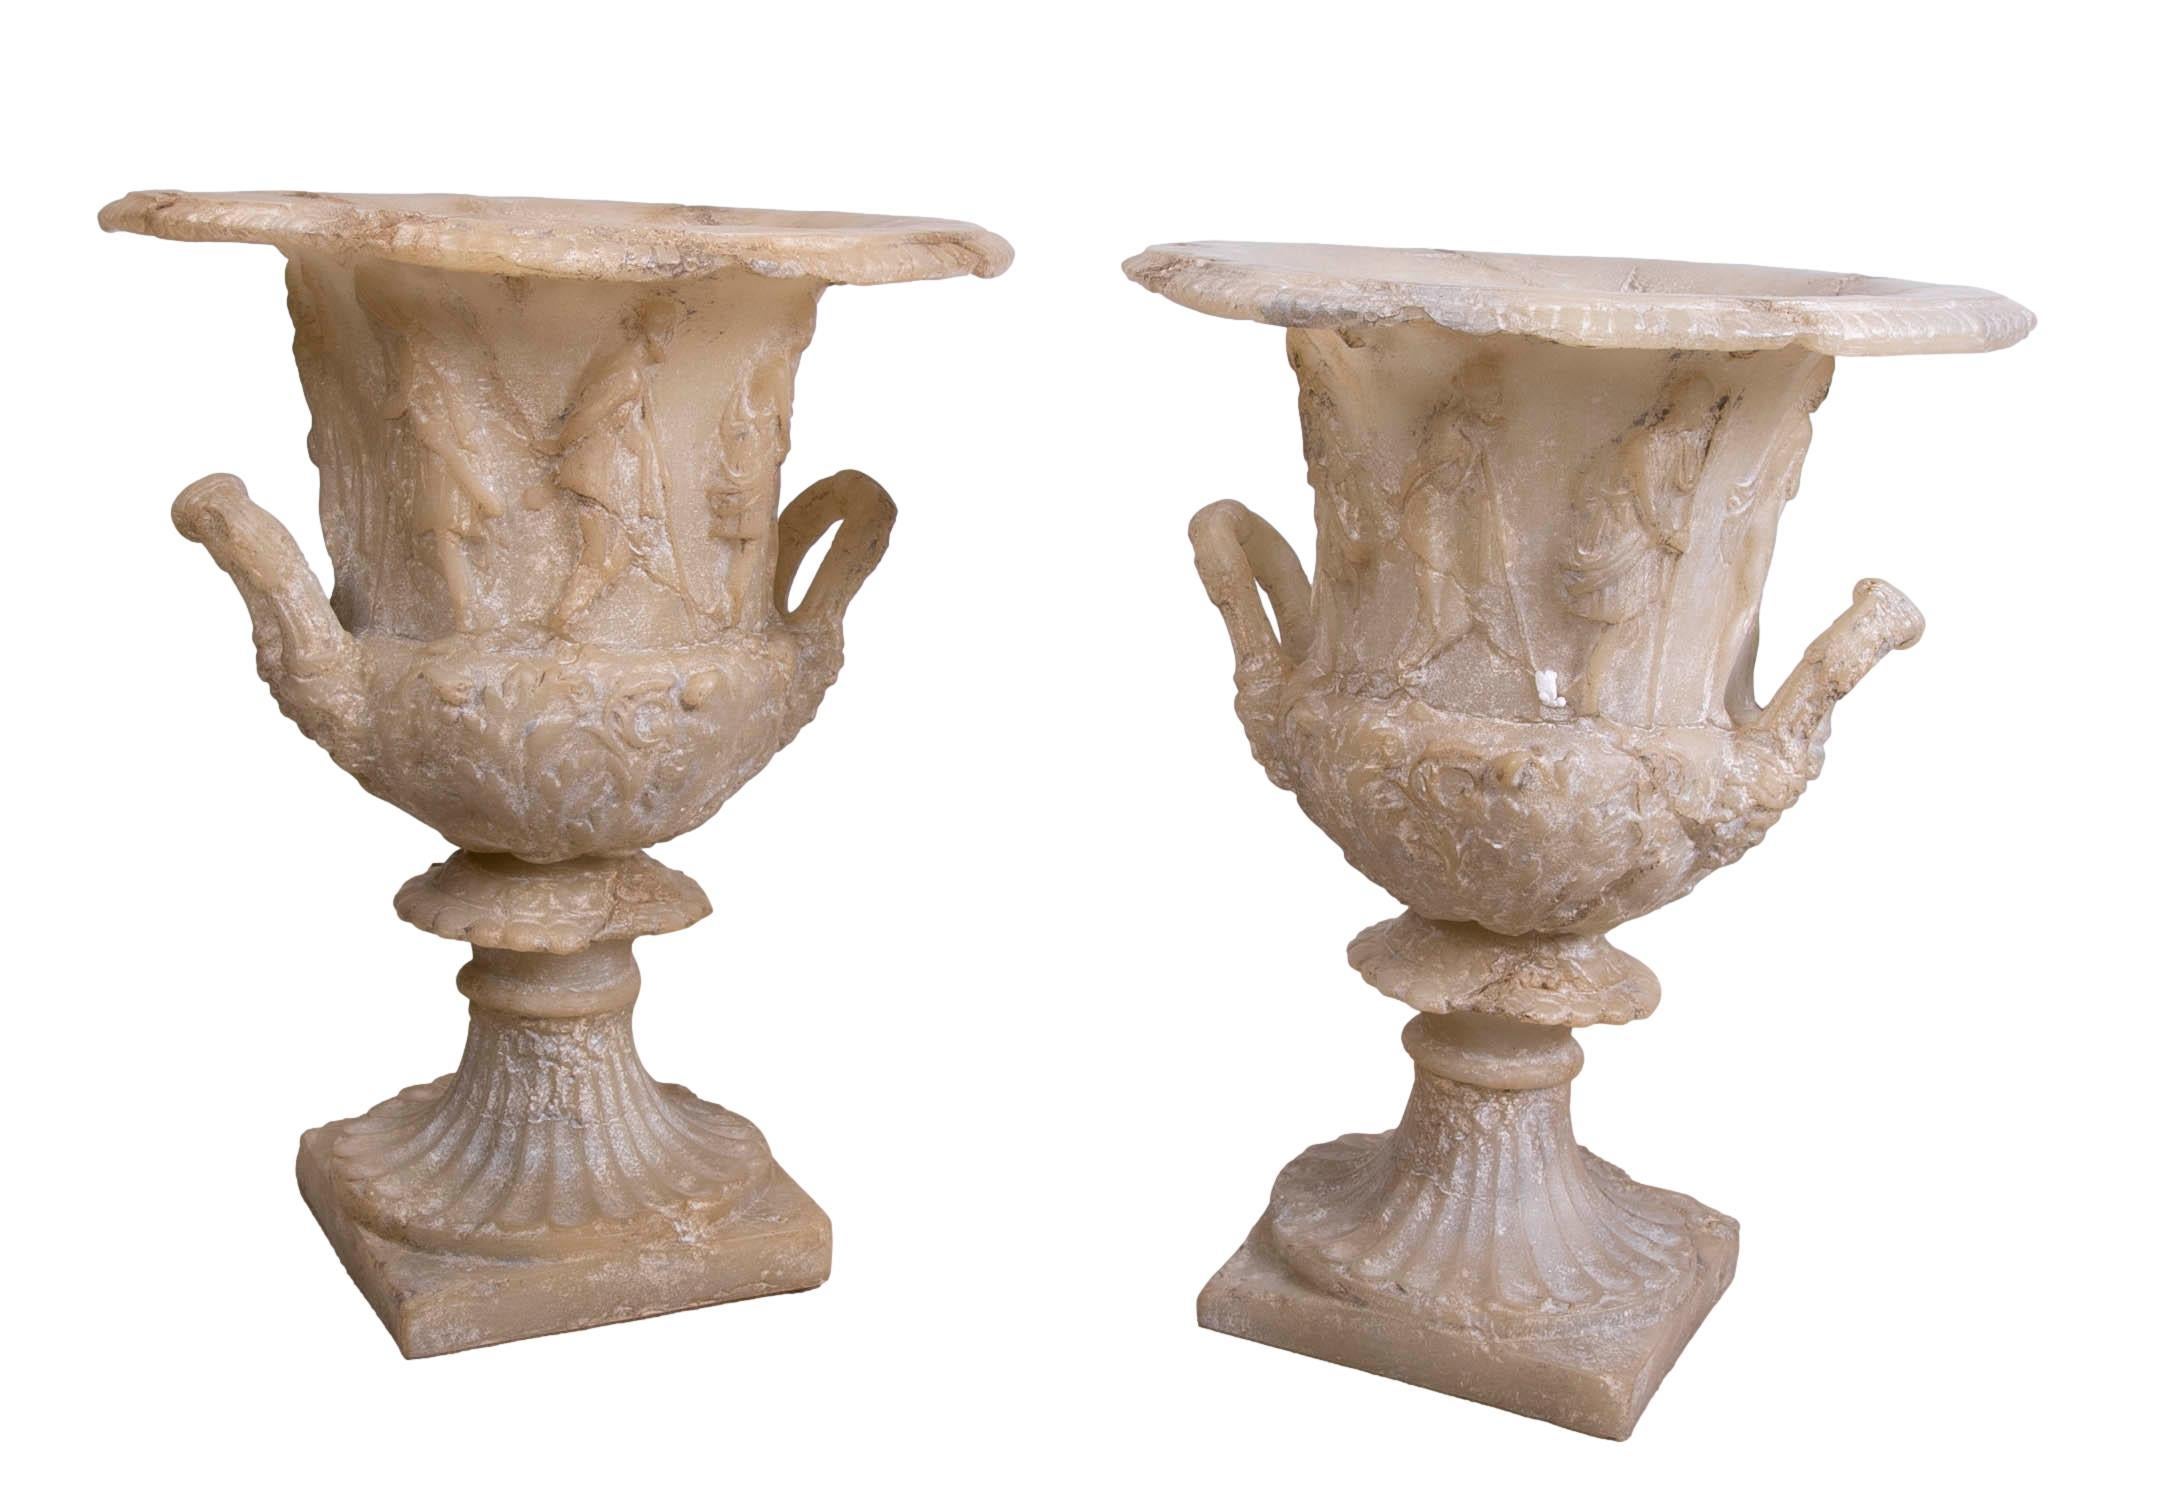 Pair of Greek-style resin goblets with antique finish.